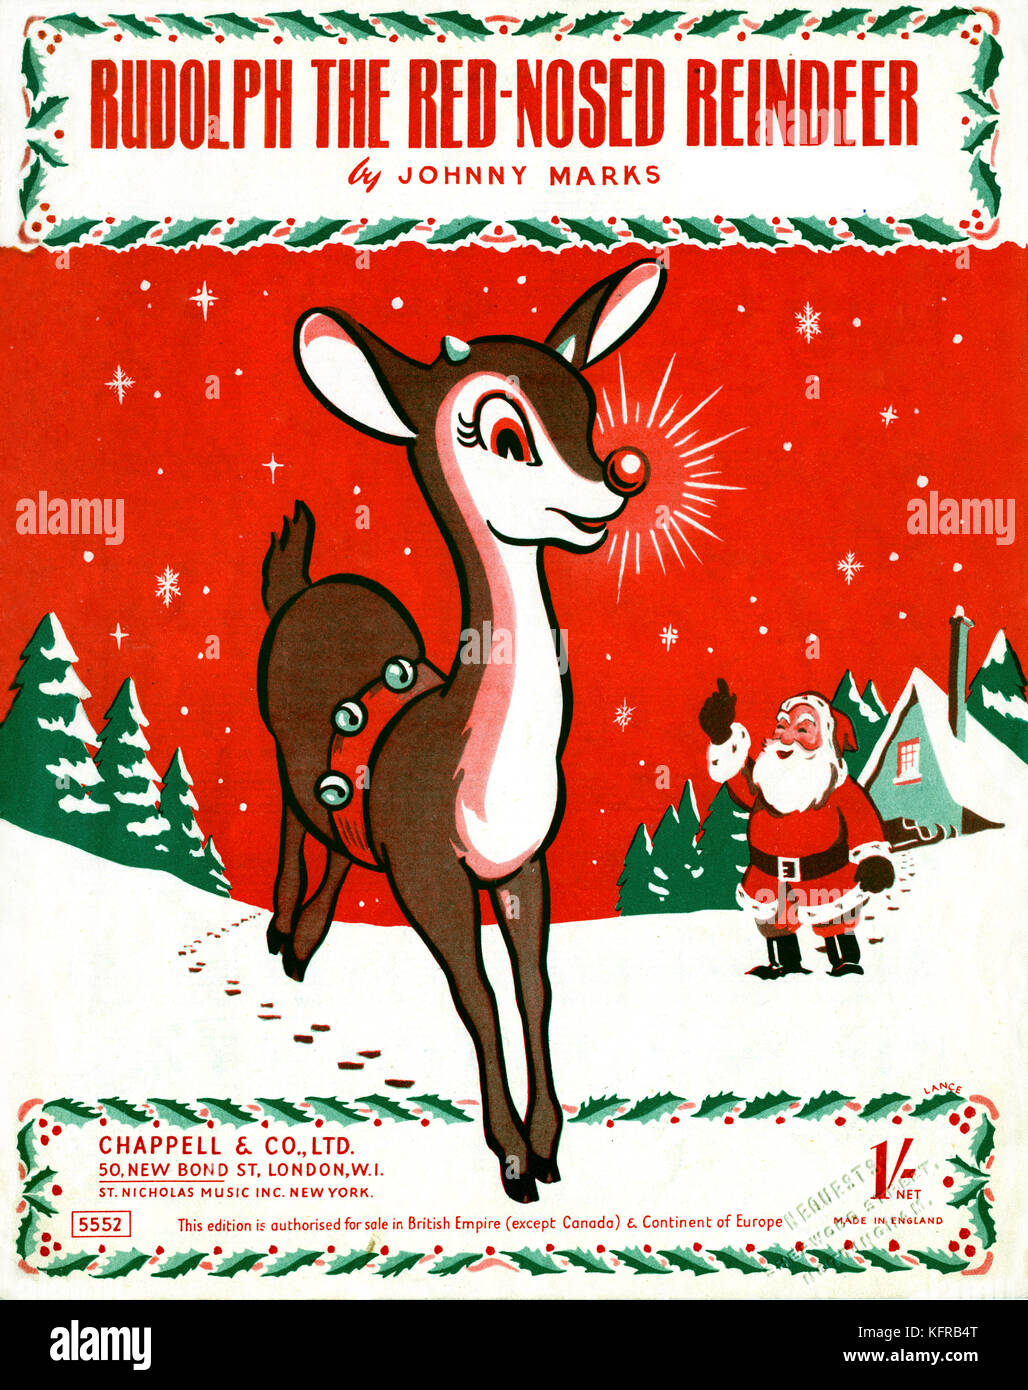 Rudolph the Red-Nosed Reindeer - score cover.  Words and music by Johnny Marks.  Chappell , London, 1949. May require copyright clearance Stock Photo